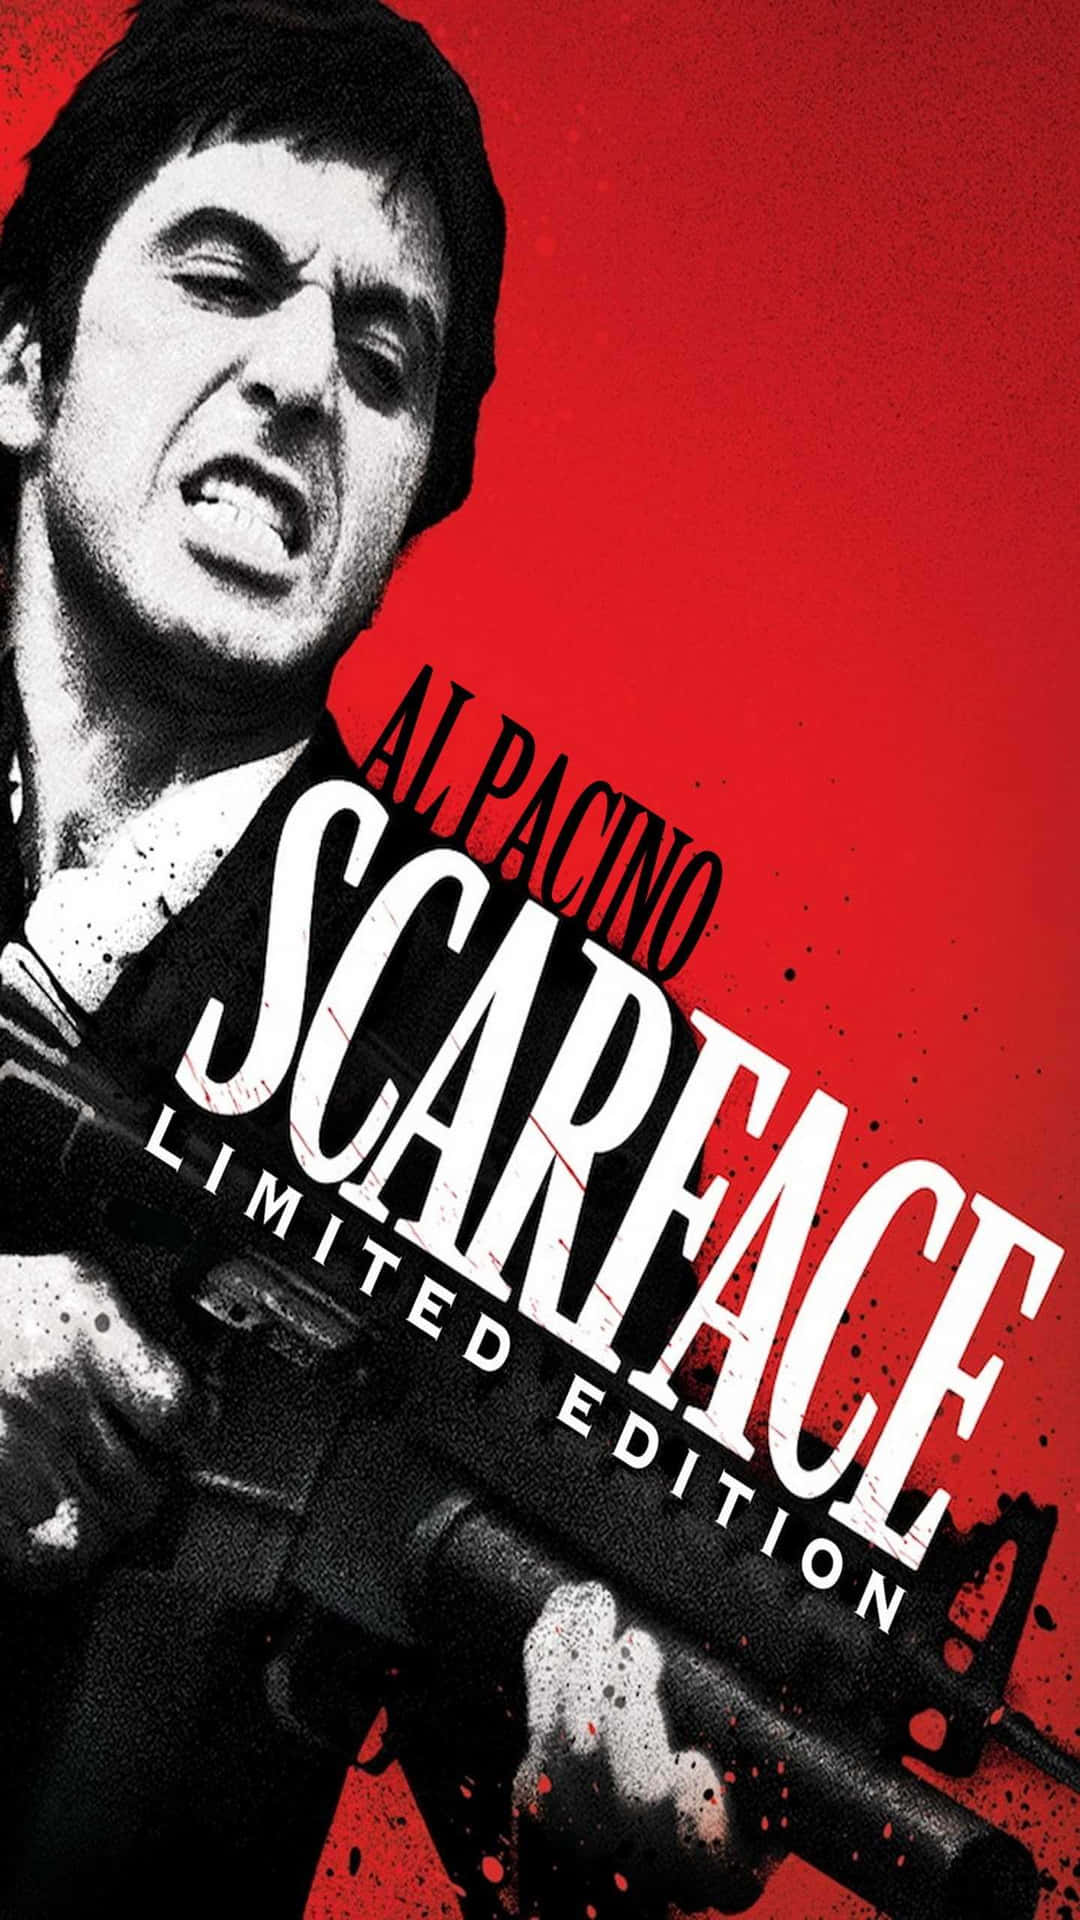 Scarface Limited Edition Poster Background